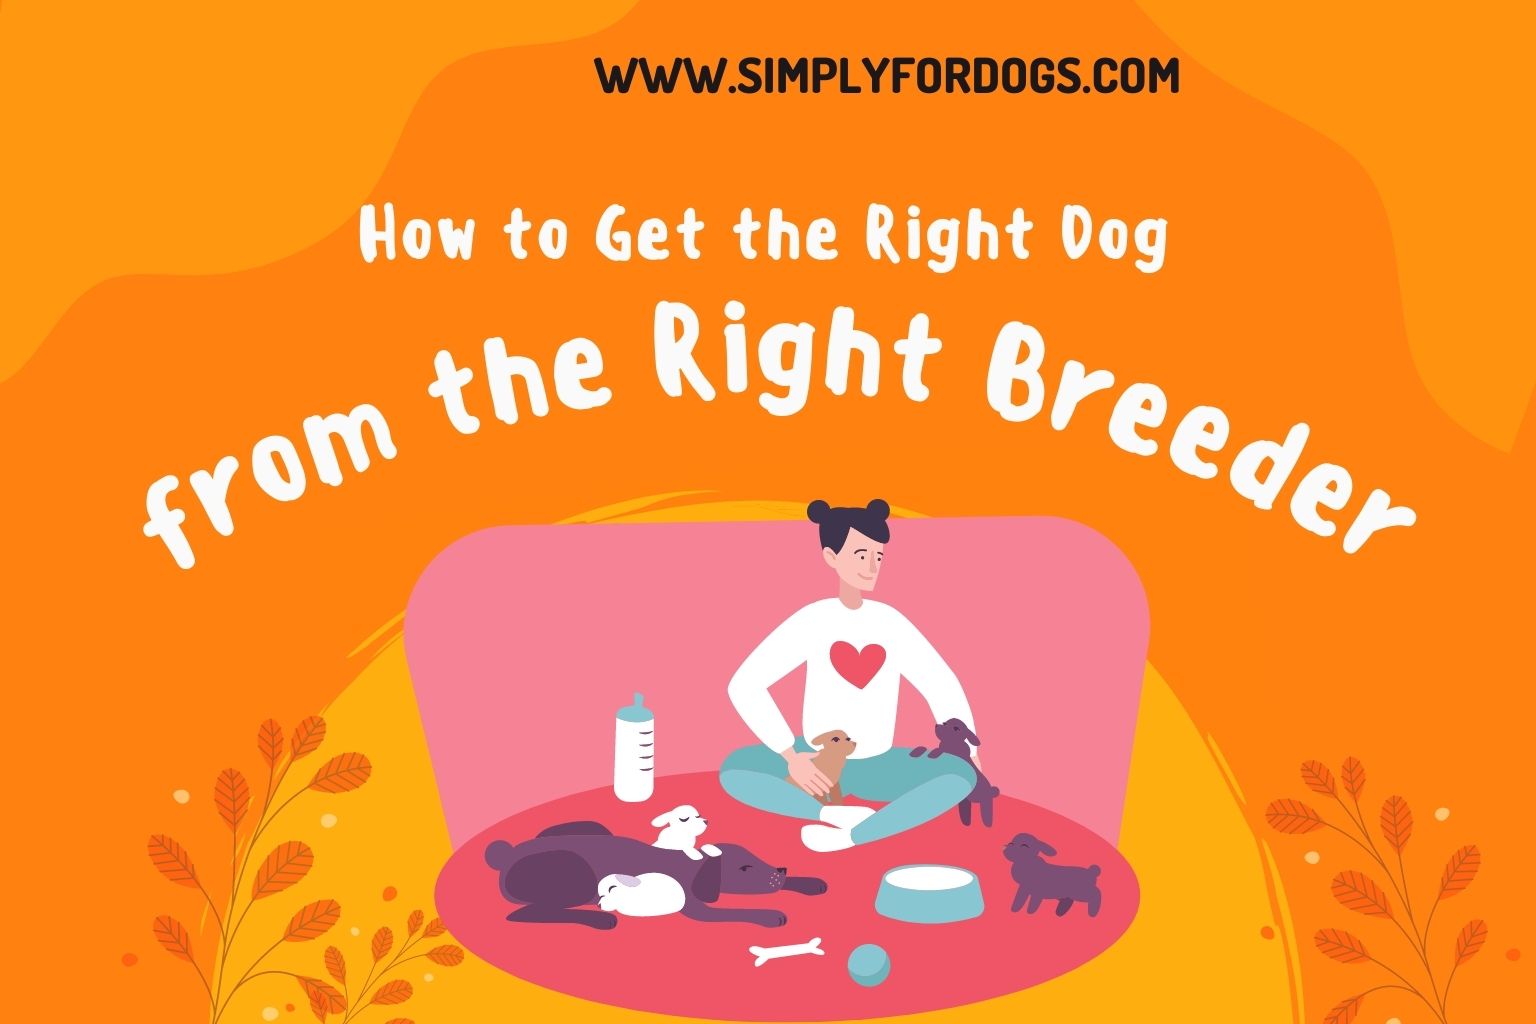 Get the right dog from the right breeder